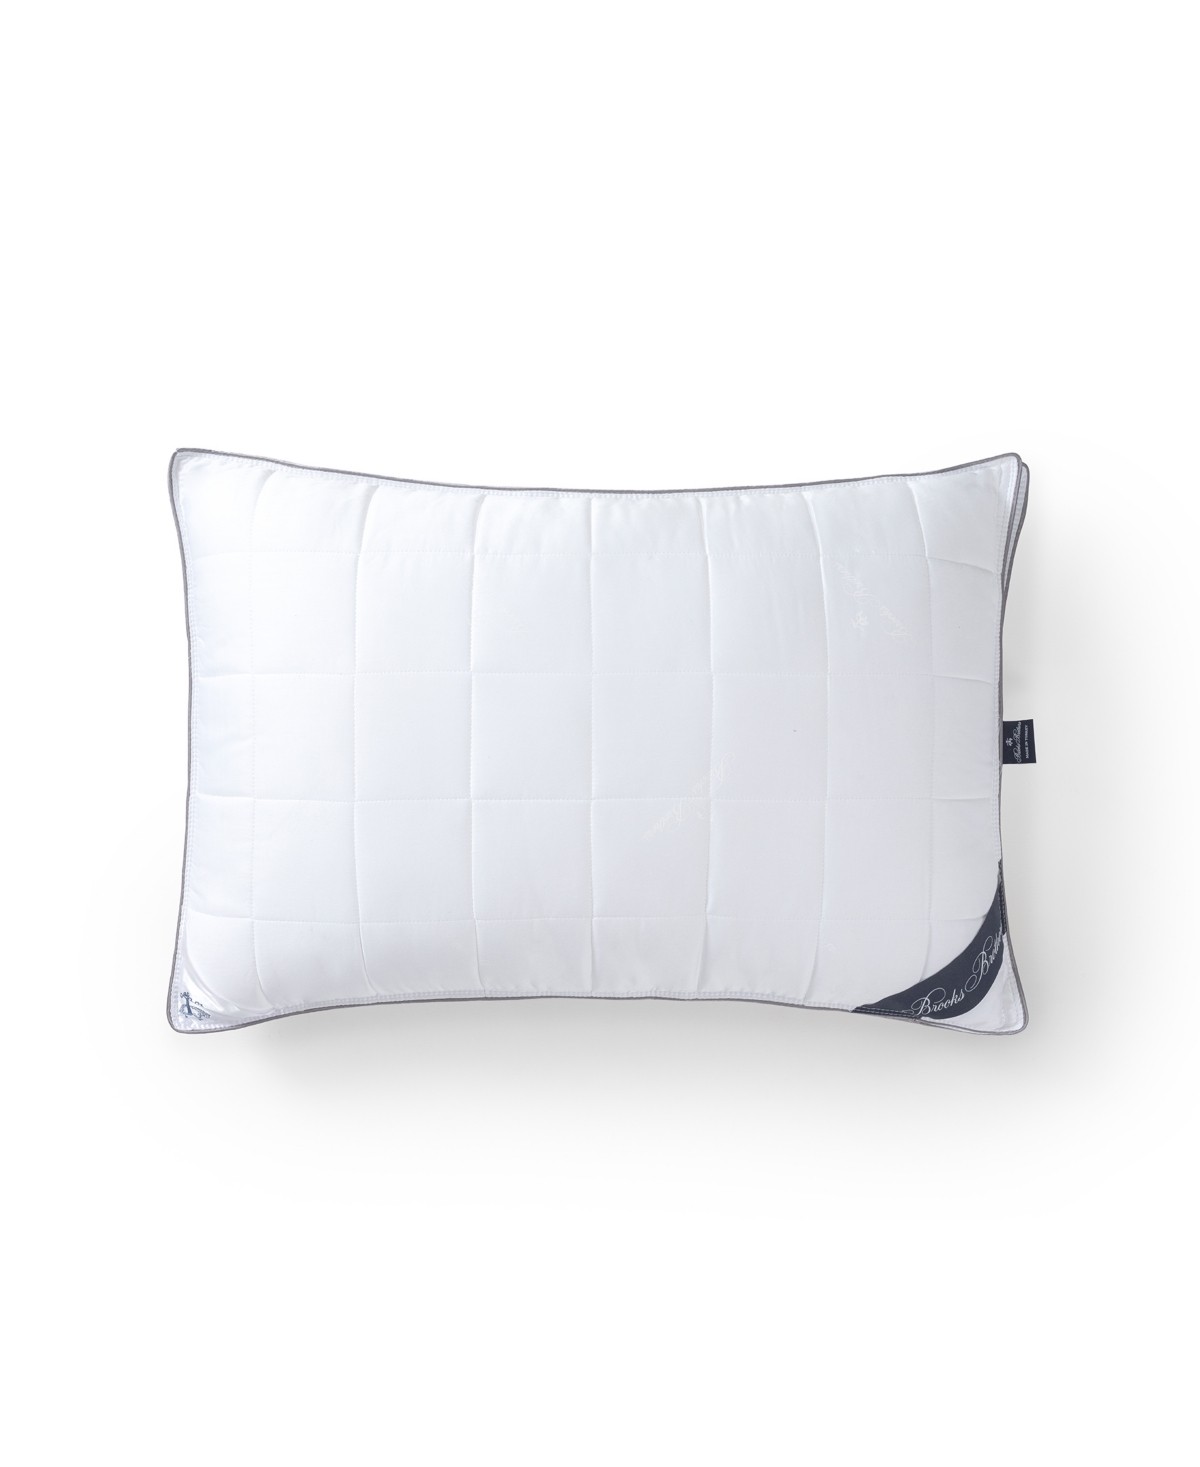 Brooks Brothers Naturally Cools Microgel Pillow, Standard/queen In White